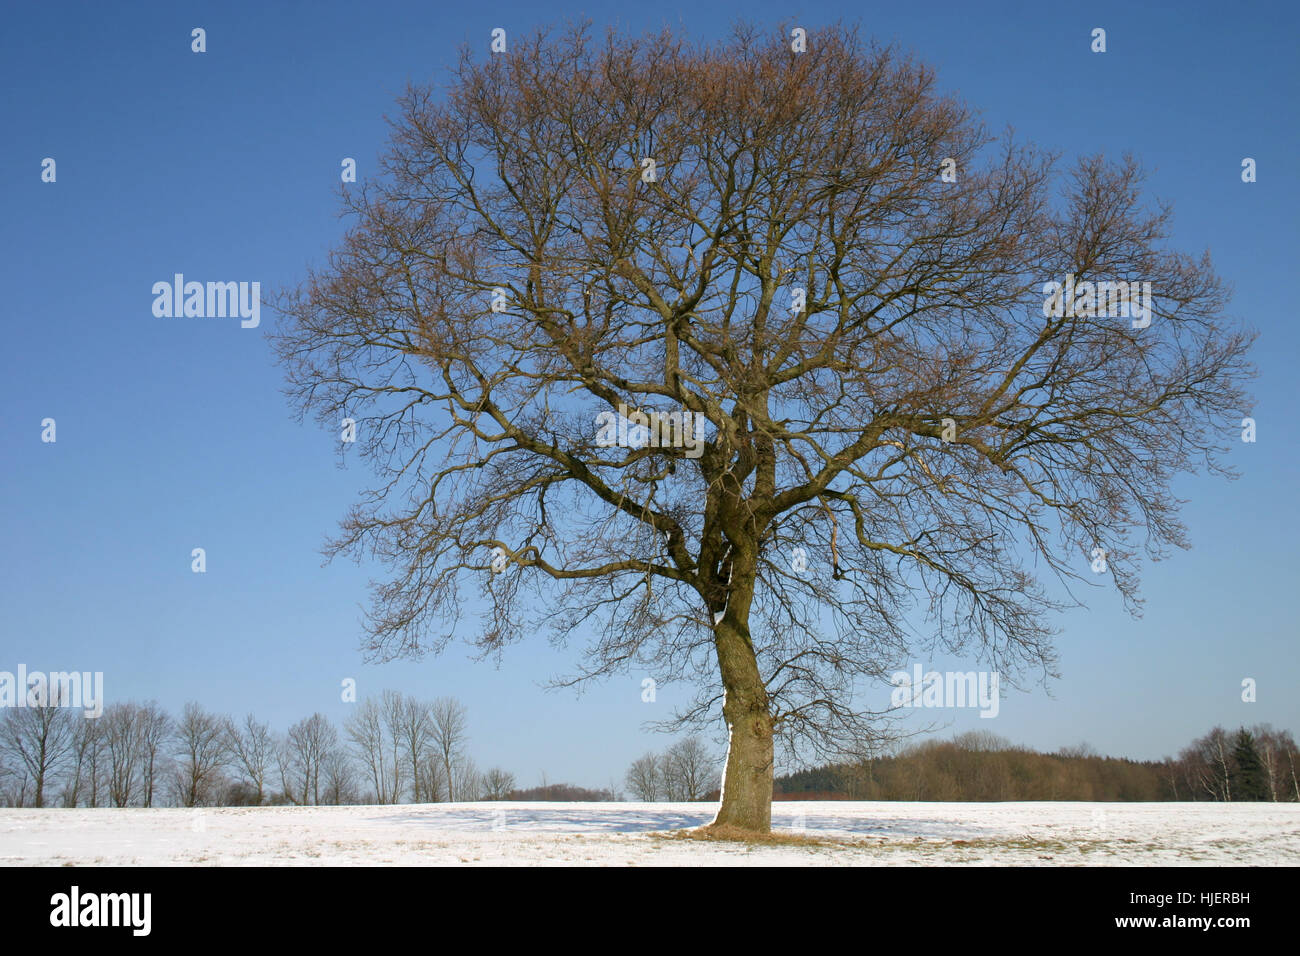 big, large, enormous, extreme, powerful, imposing, immense, relevant, tree, Stock Photo